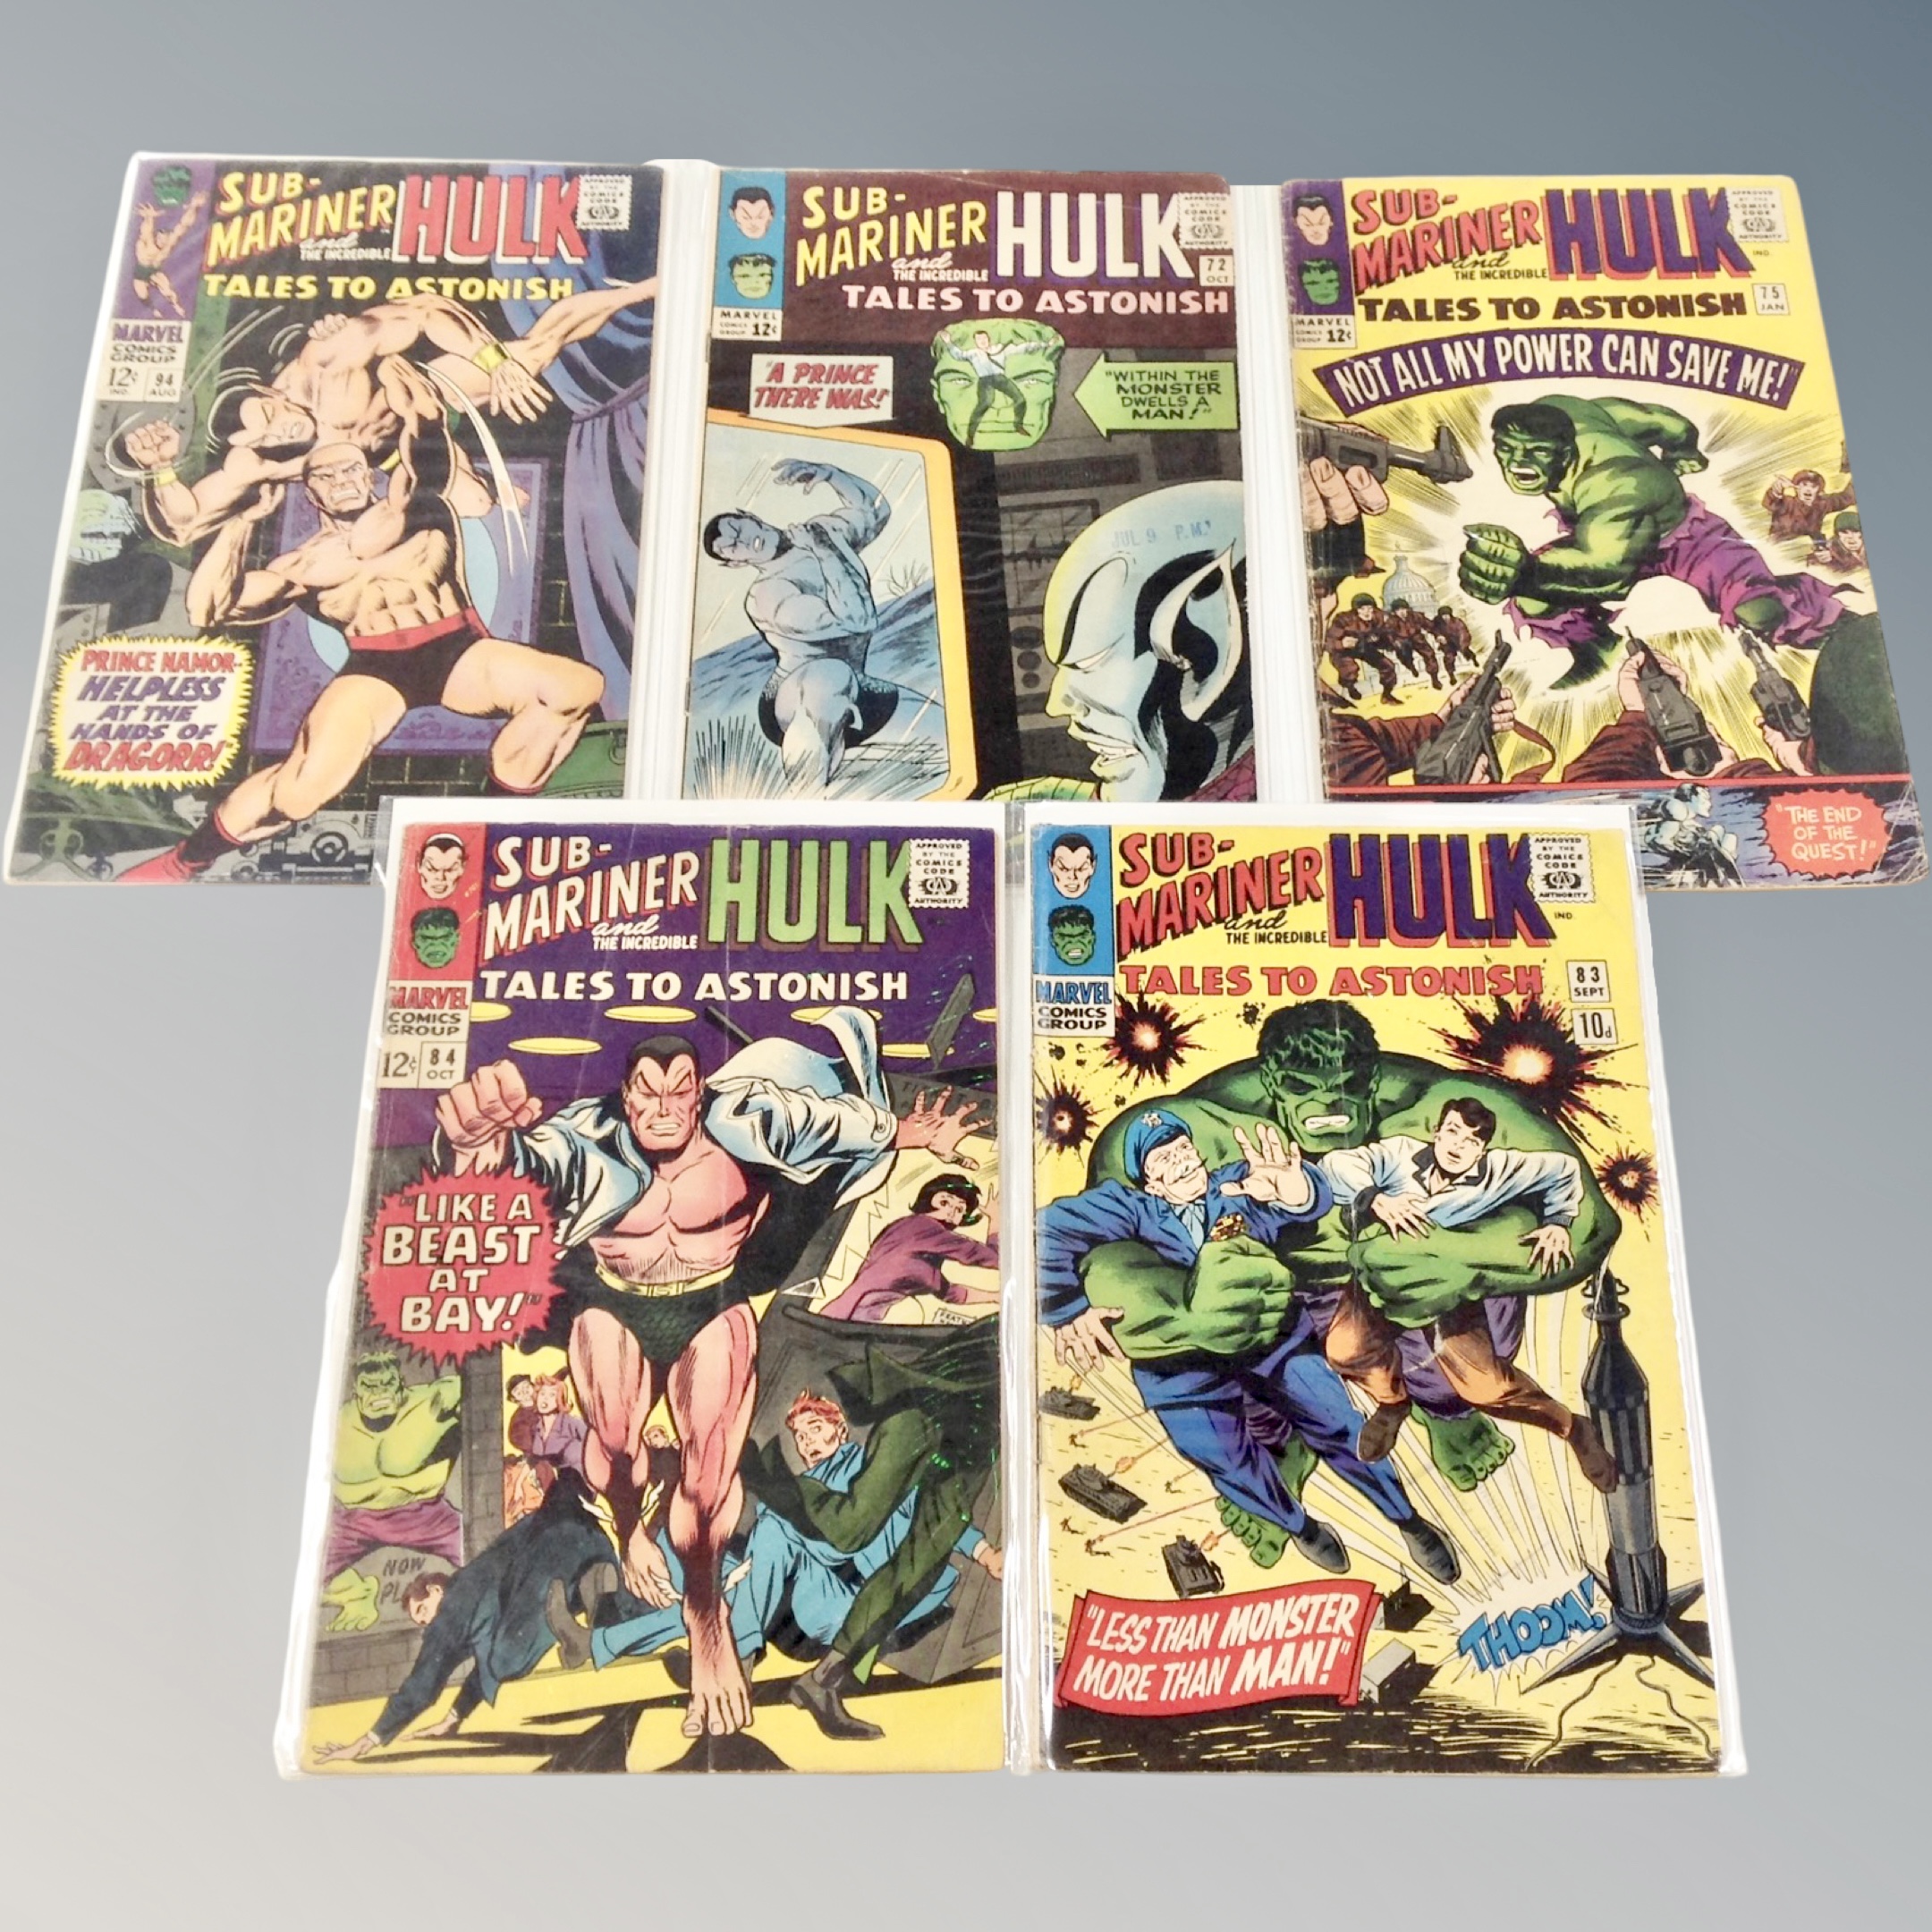 Marvel Comics : Sub-Mariner and The Incredible Hulk, Tales to Astonish numbers 83 (10d cover) 72,